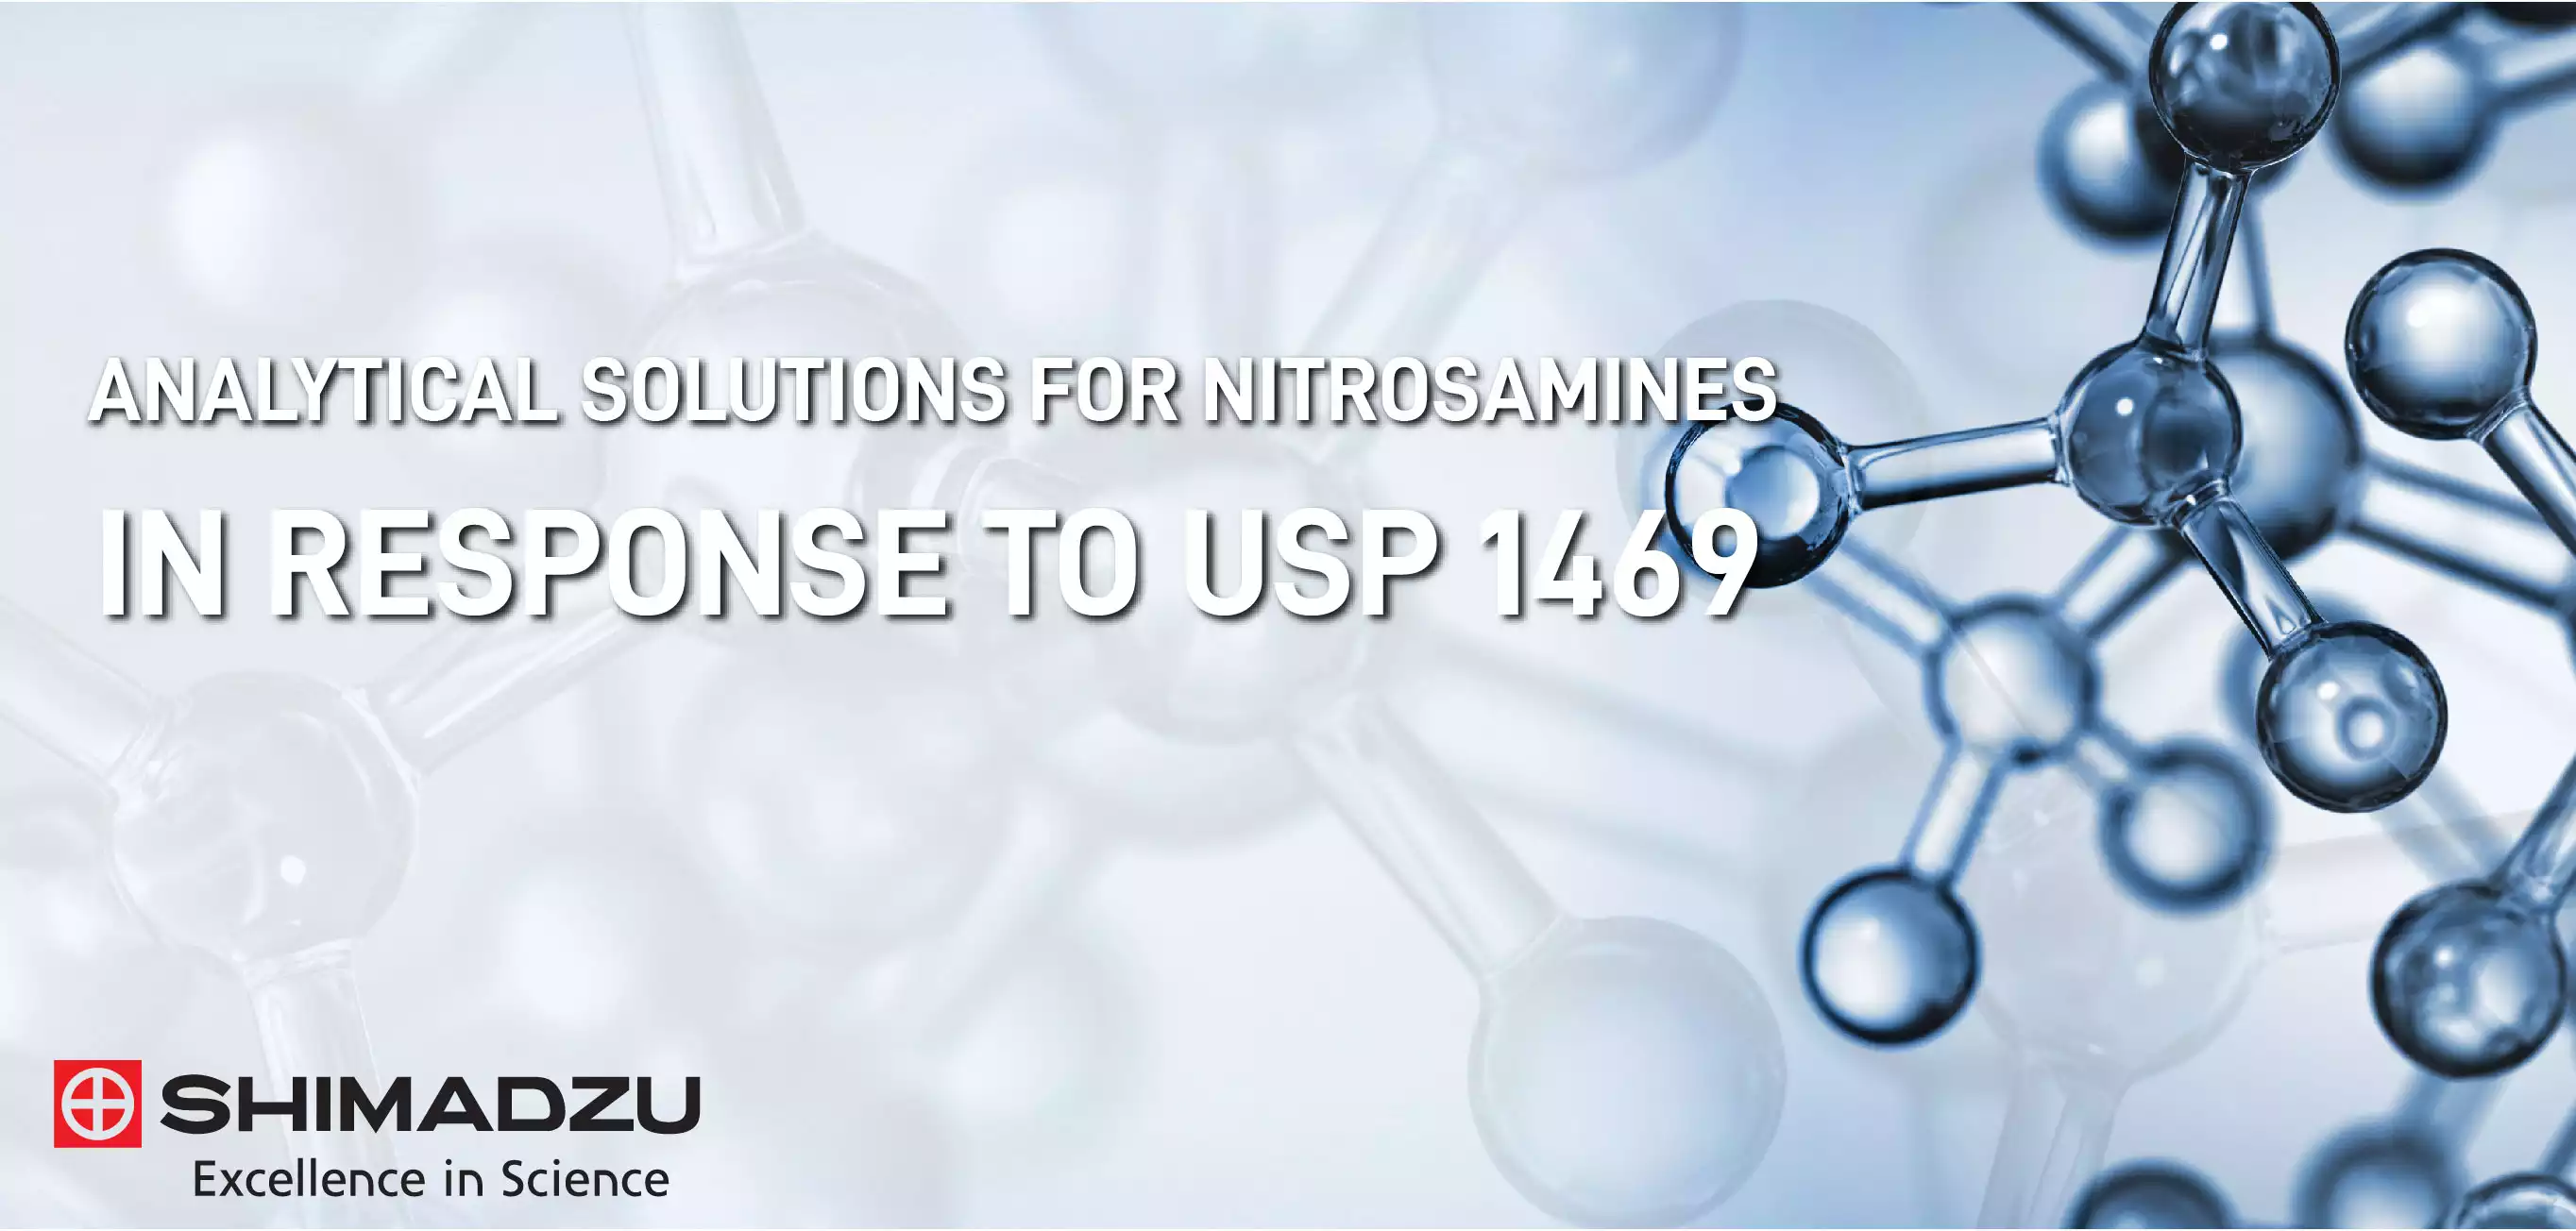 Analytical Solutions for Nitrosamines in Response to USP 1469 by Shimadzu